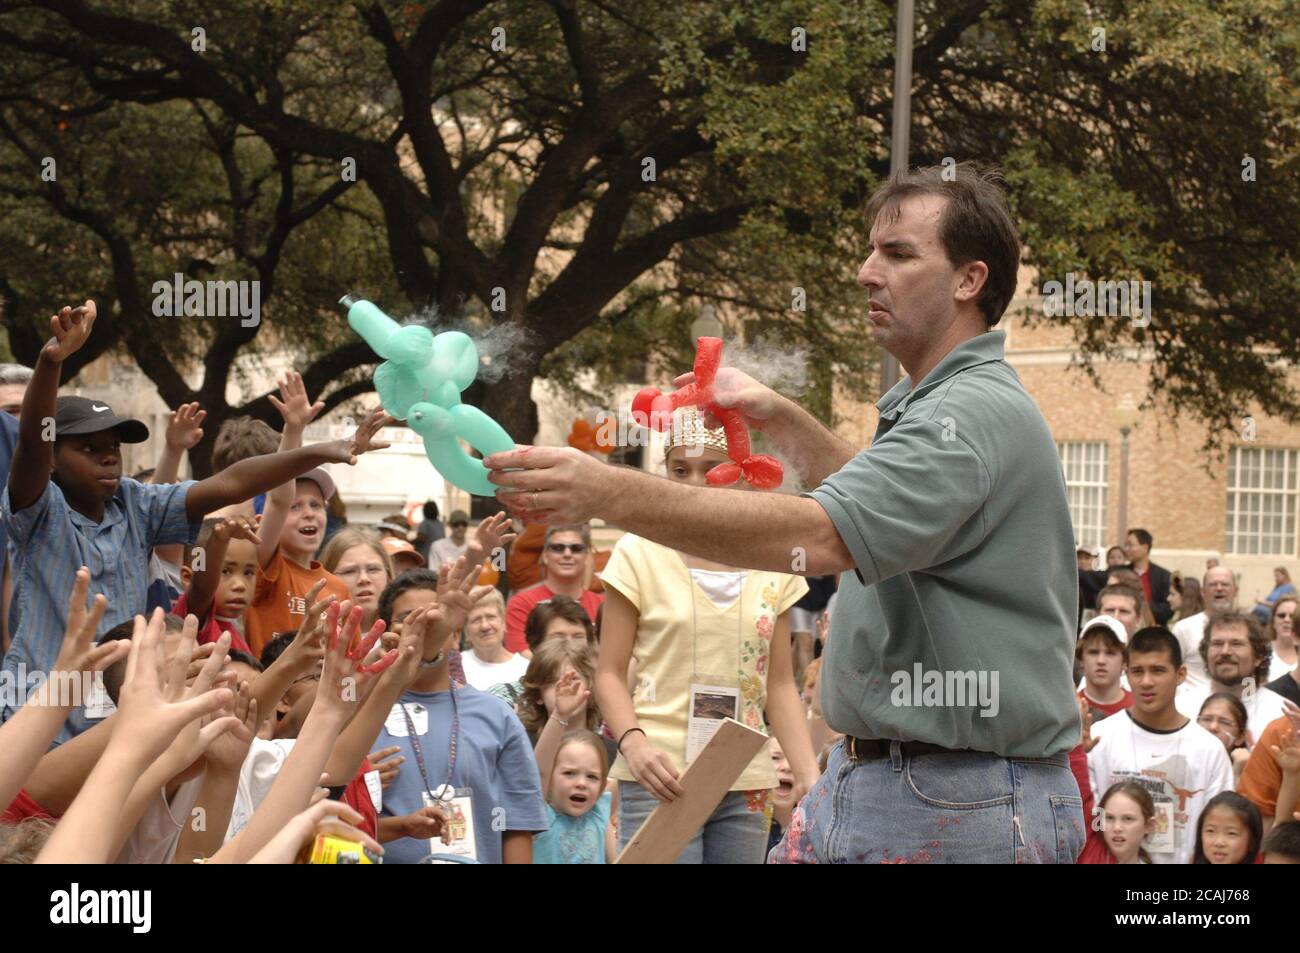 Austin, Texas USA, March 4, 2006: Children watch a 'Chemistry Circus' put on by professor Dr. David Laude as part of an open house 'Explore UT' at the University of Texas at Austin.  Dr. Laude shrinks air-filled balloons by dipping them in liquid nitrogen.  ©Bob Daemmrich Stock Photo